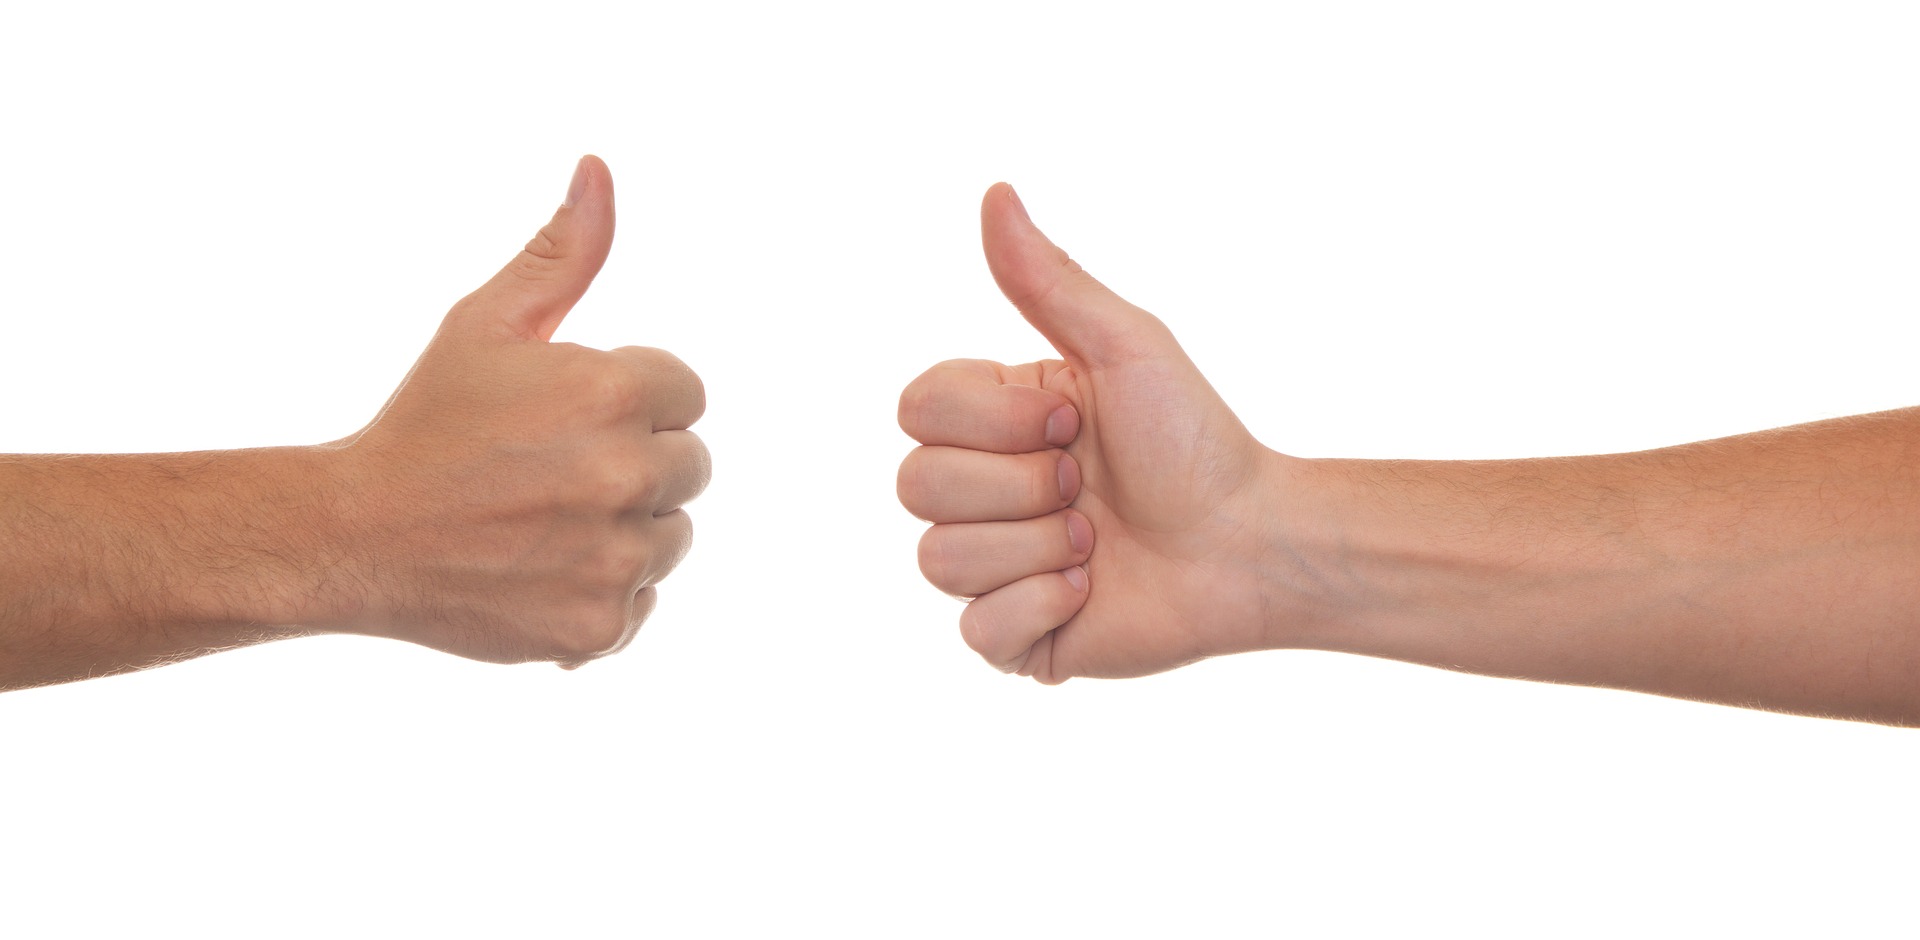 Photo; White background; On the left is a light-skinned hand showing a thumb up. On the right is also a light-skinned hand also showing a thumb up. The two thumbs point towards each other.